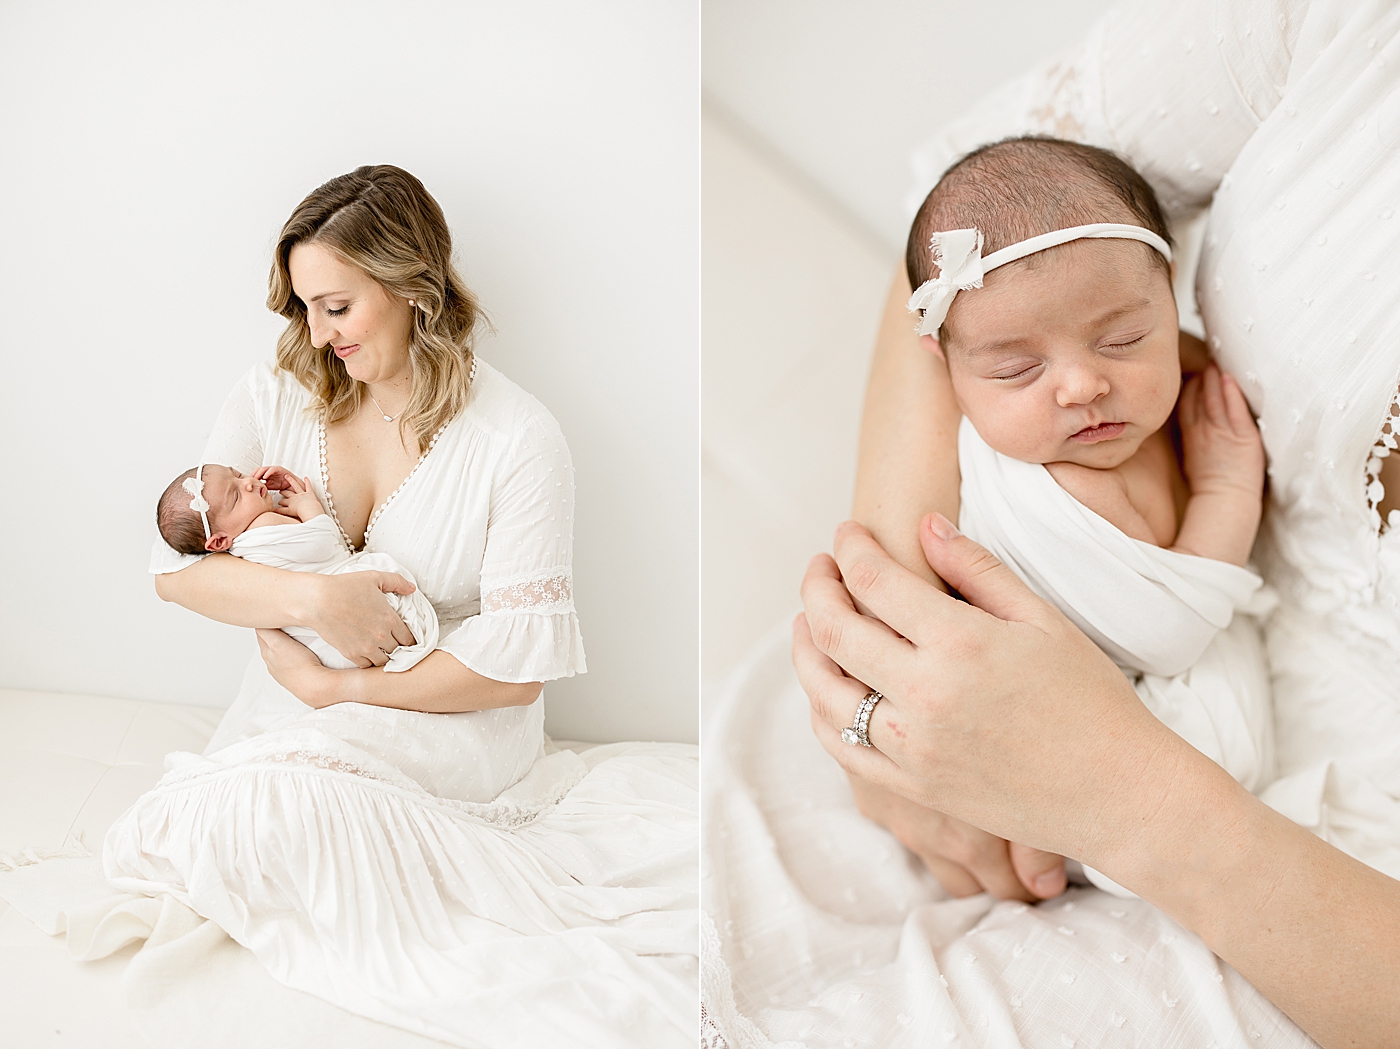 Mom with baby girl. Both are wearing white. Photo by Brittany Elise Photography.